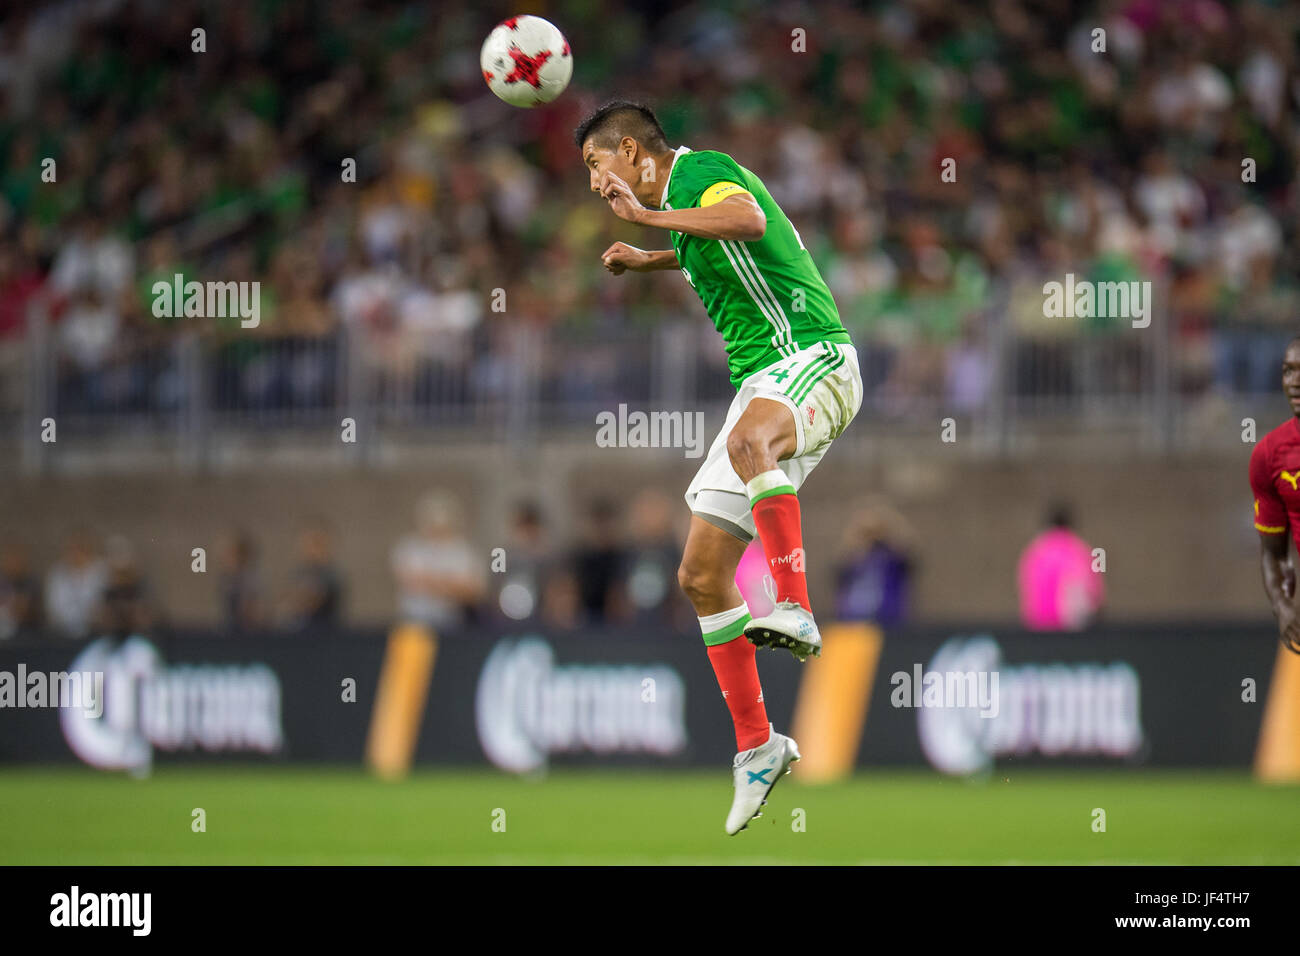 Houston, TX, USA. 28th June, 2017. Mexico defender Hugo Ayala (4) heads the ball during the 1st half of an international soccer friendly match between Mexico and Ghana at NRG Stadium in Houston, TX. Trask Smith/CSM/Alamy Live News Stock Photo